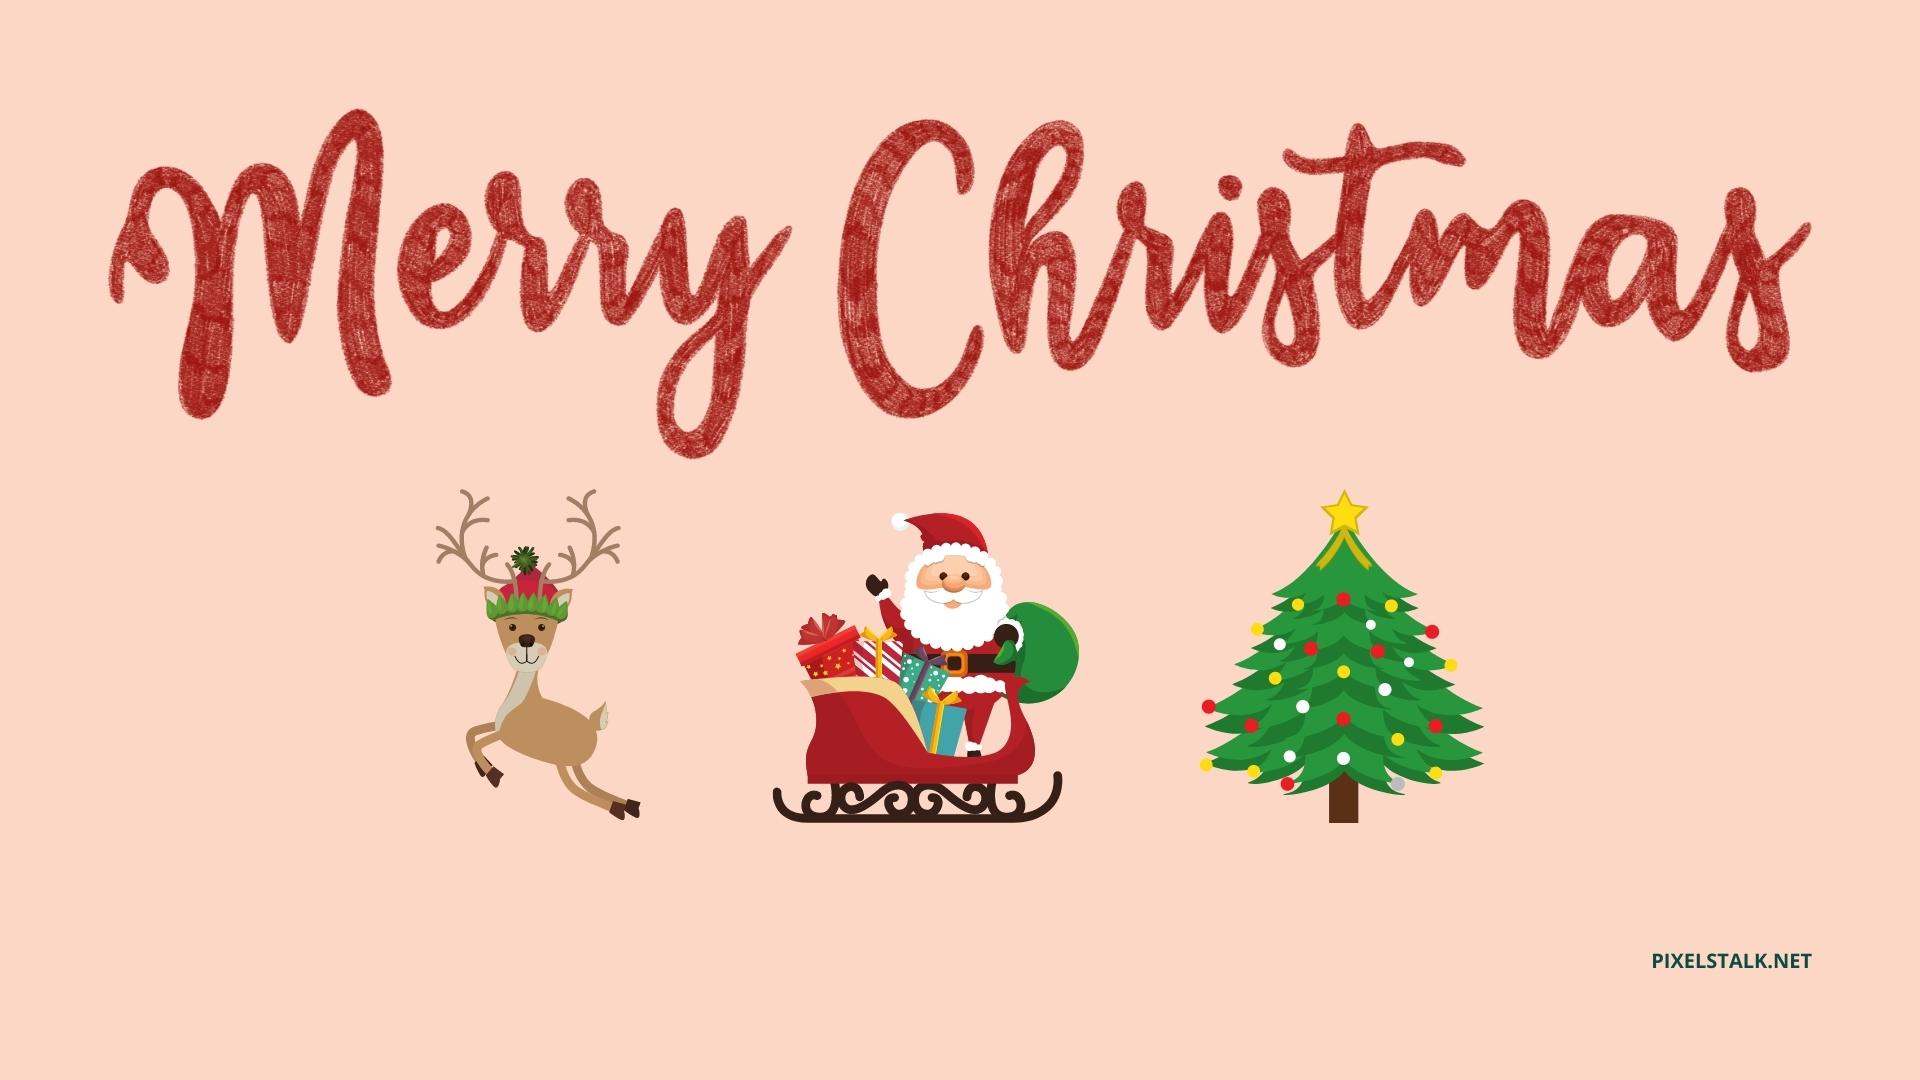 Merry Christmas Wallpapers HD free download 